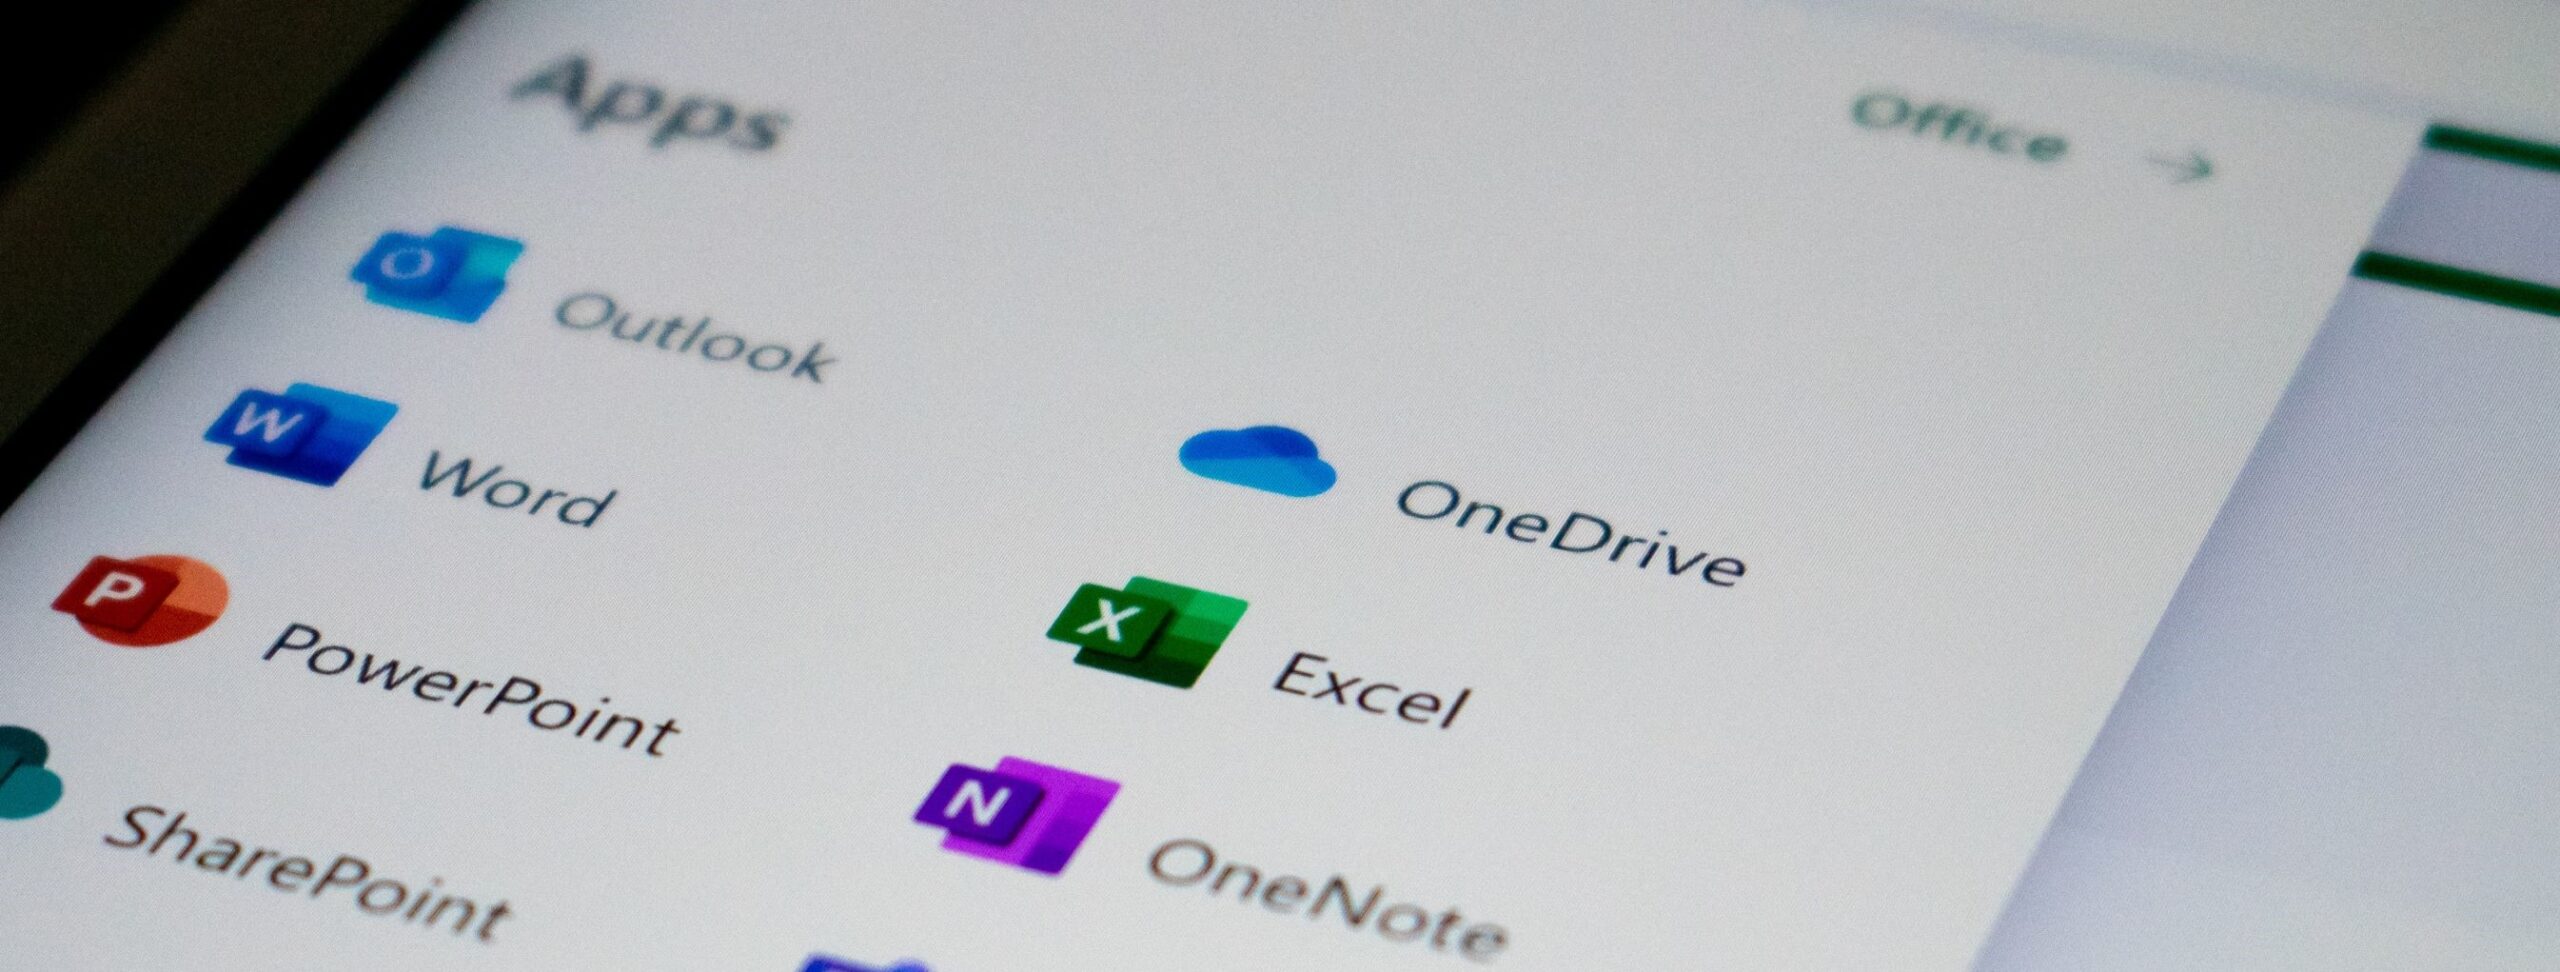 Microsoft Office apps listed on a screen